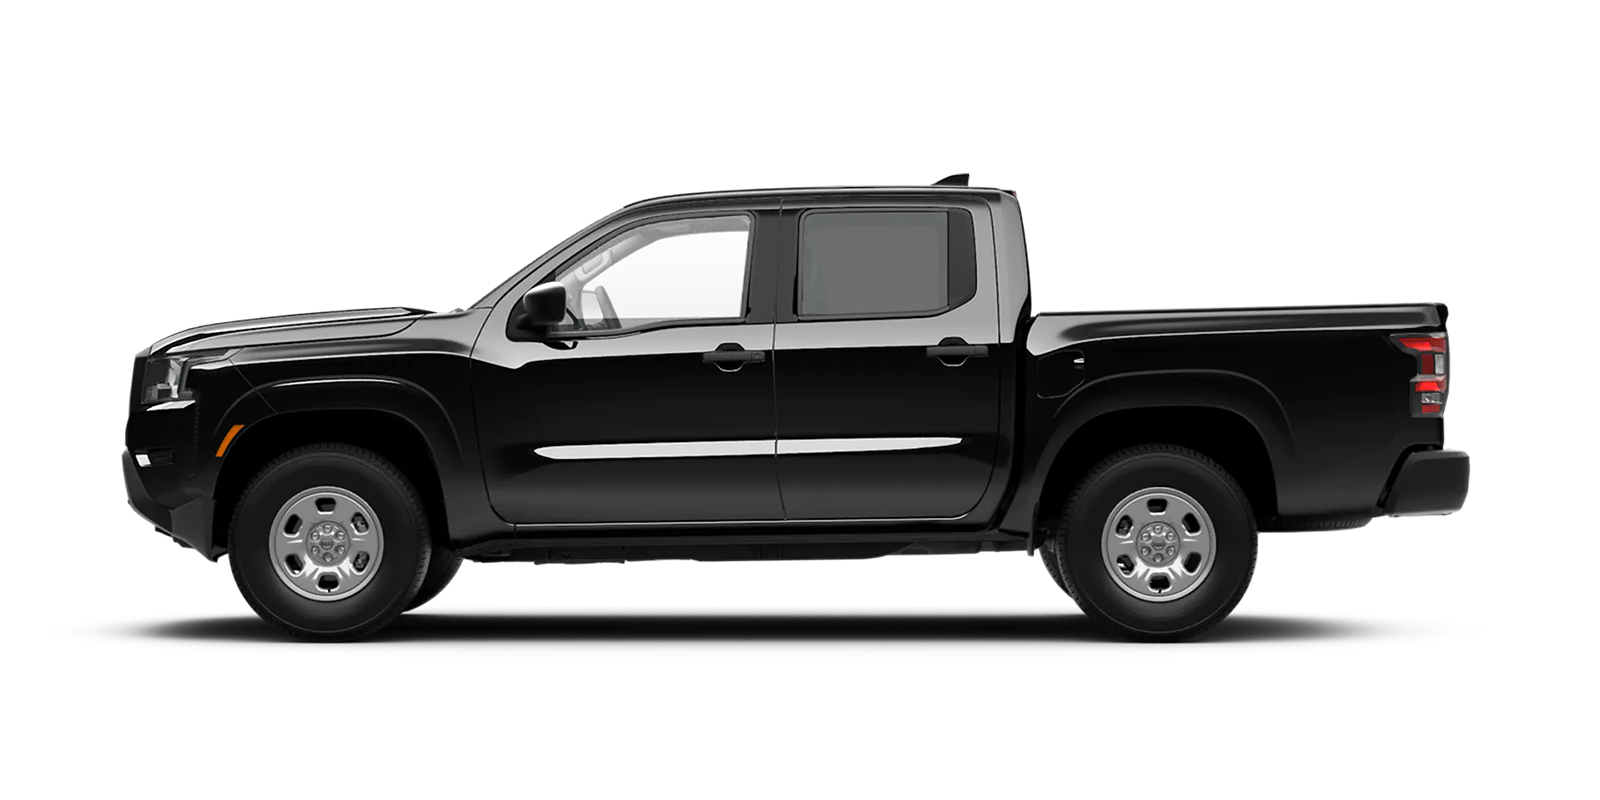 2022 Frontier Crew Cab S 4x4 in Super Black | Greenway Nissan of Florence in Florence AL